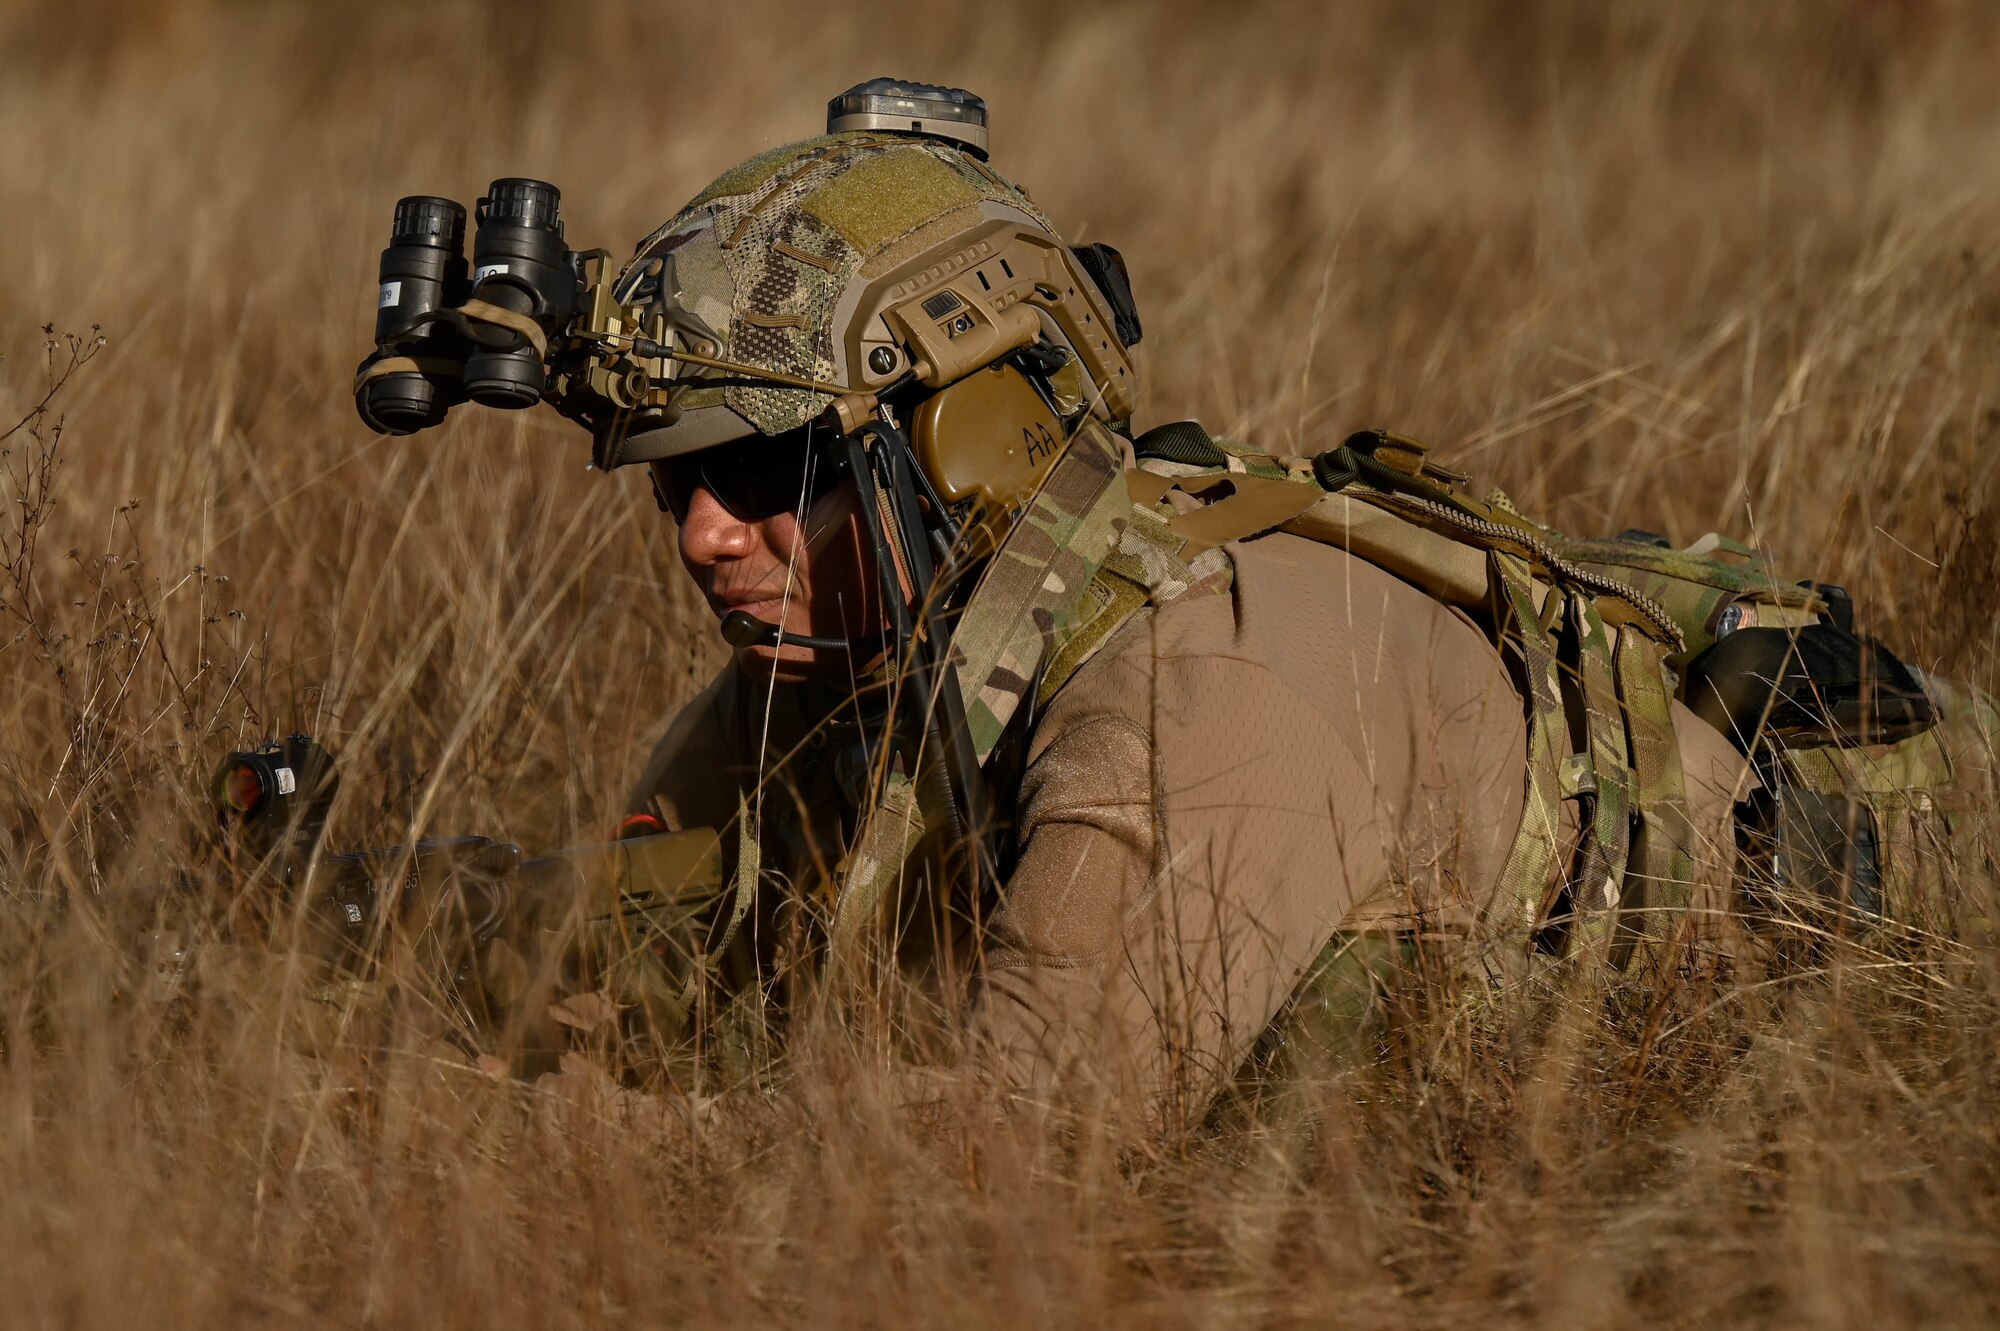 A U.S. Air Force Special Tactics operator lays in the grass to pull security while his team sets up an airfield at Eglin Range, Florida, during Emerald Warrior 21.1, Feb. 19, 2021. Special Tactics teams conduct airfield seizure and control operations to ensure uncontested access for joint forces. Emerald Warrior is the largest joint special operations exercise involving U.S. Special Operations Command forces training to respond to various threats across the spectrum of conflict. (U.S. Air Force photo by Tech. Sgt. Rose Gudex)